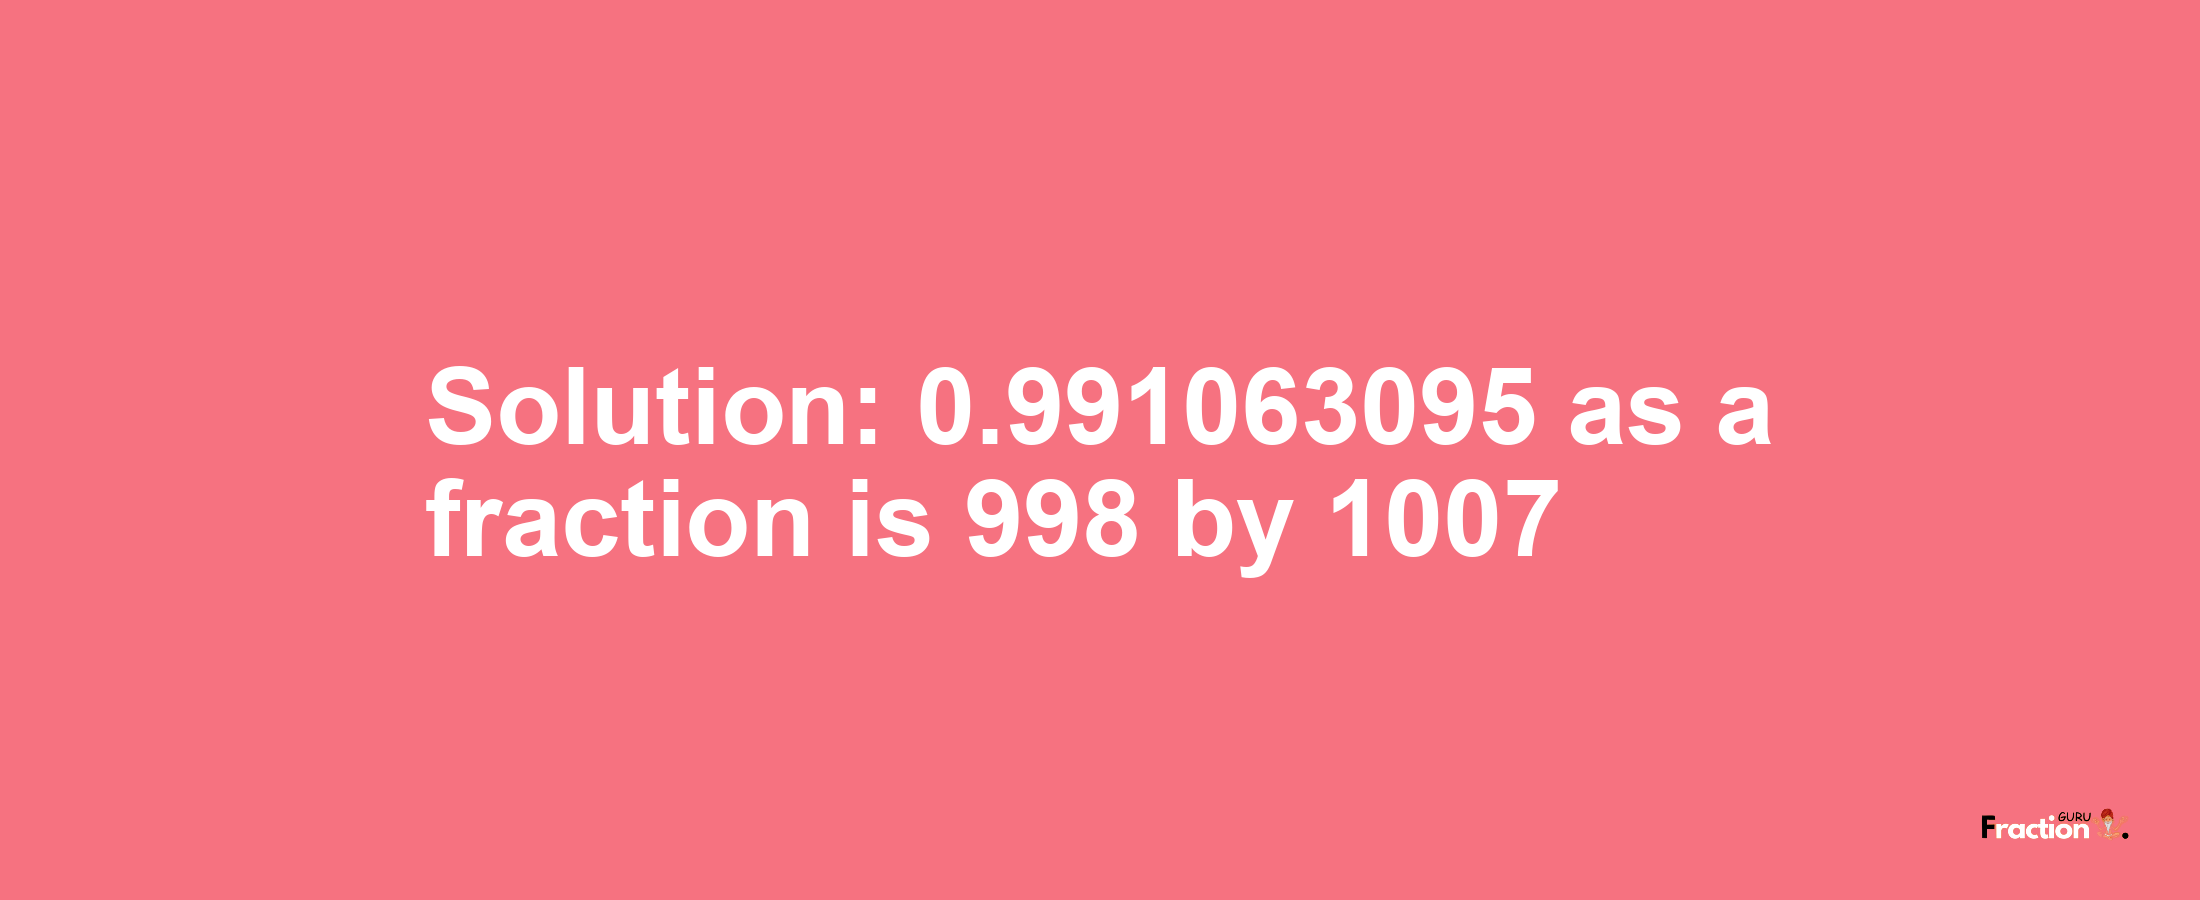 Solution:0.991063095 as a fraction is 998/1007